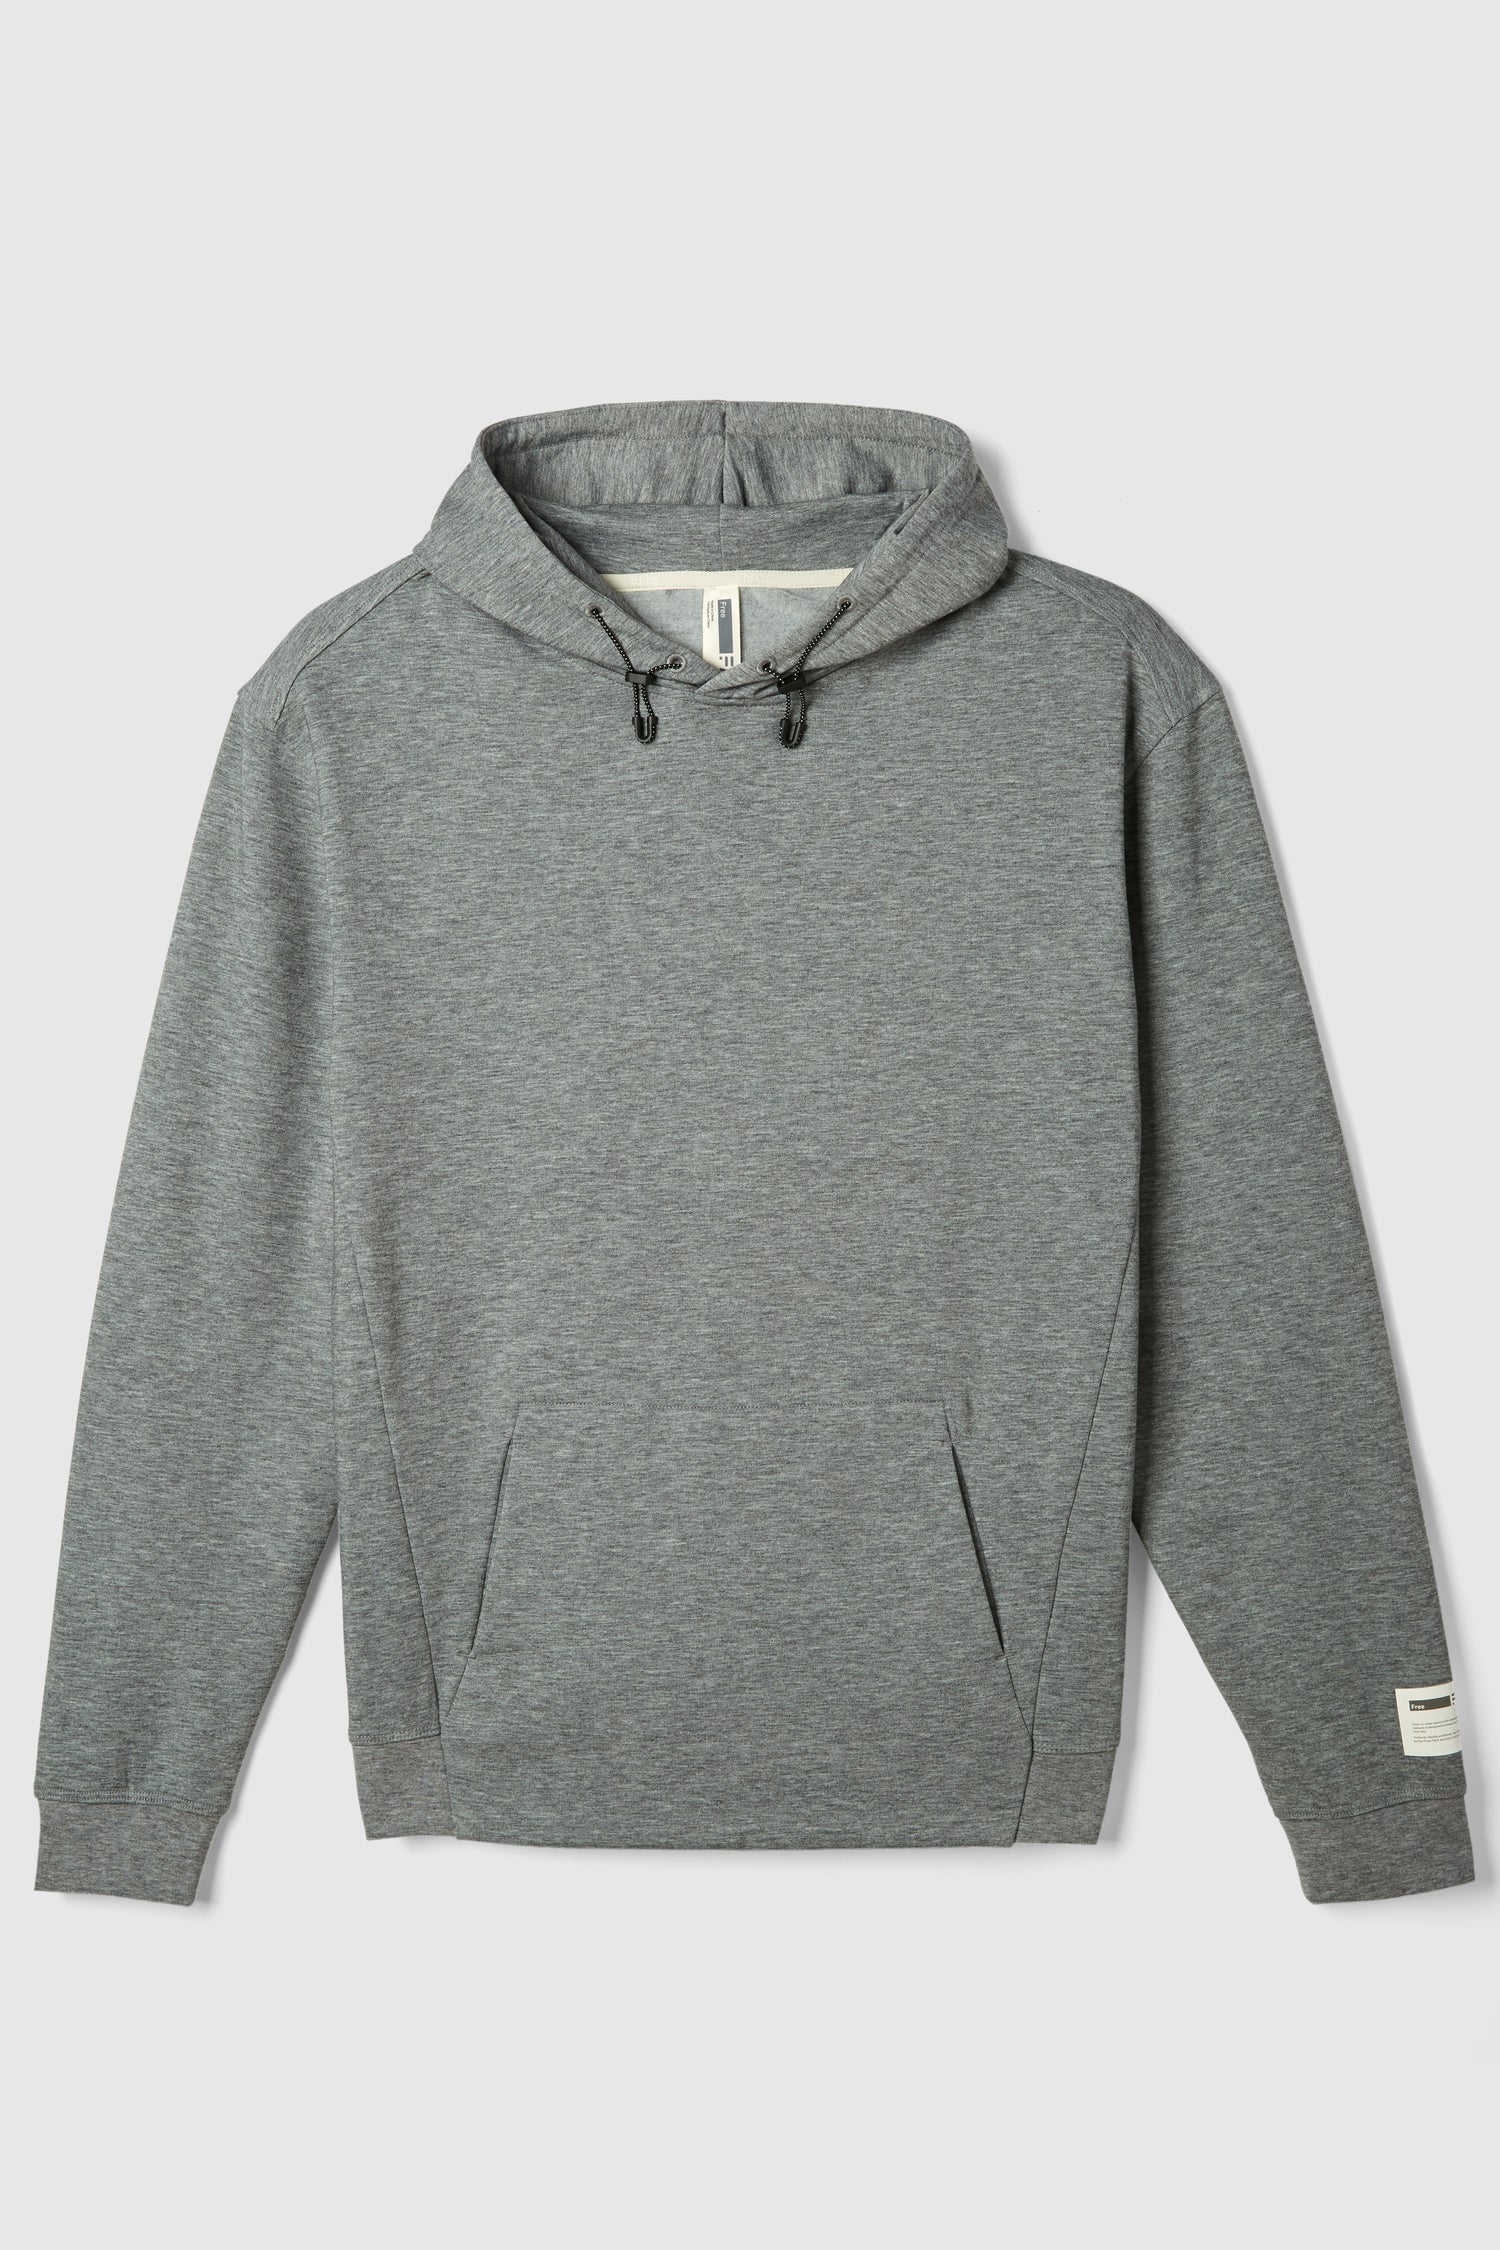 Free - lined hoodie with stand-up collar